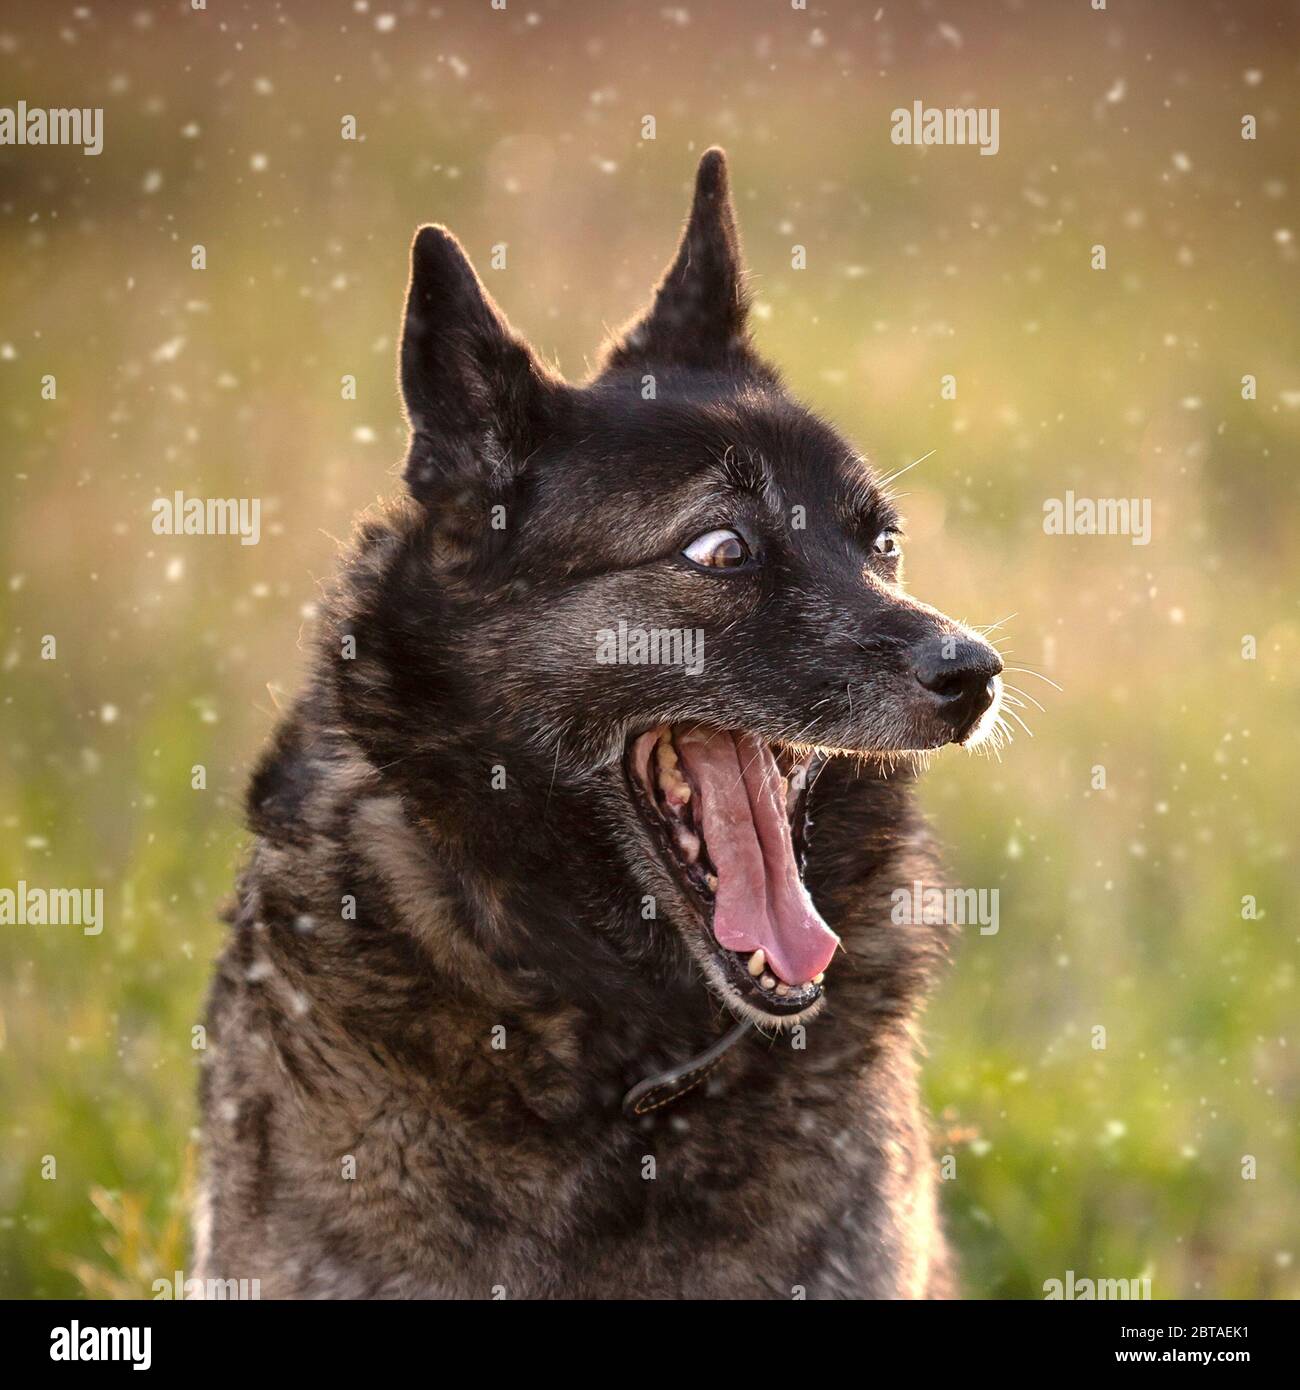 Funny outbred dog yawns outdoors Stock Photo